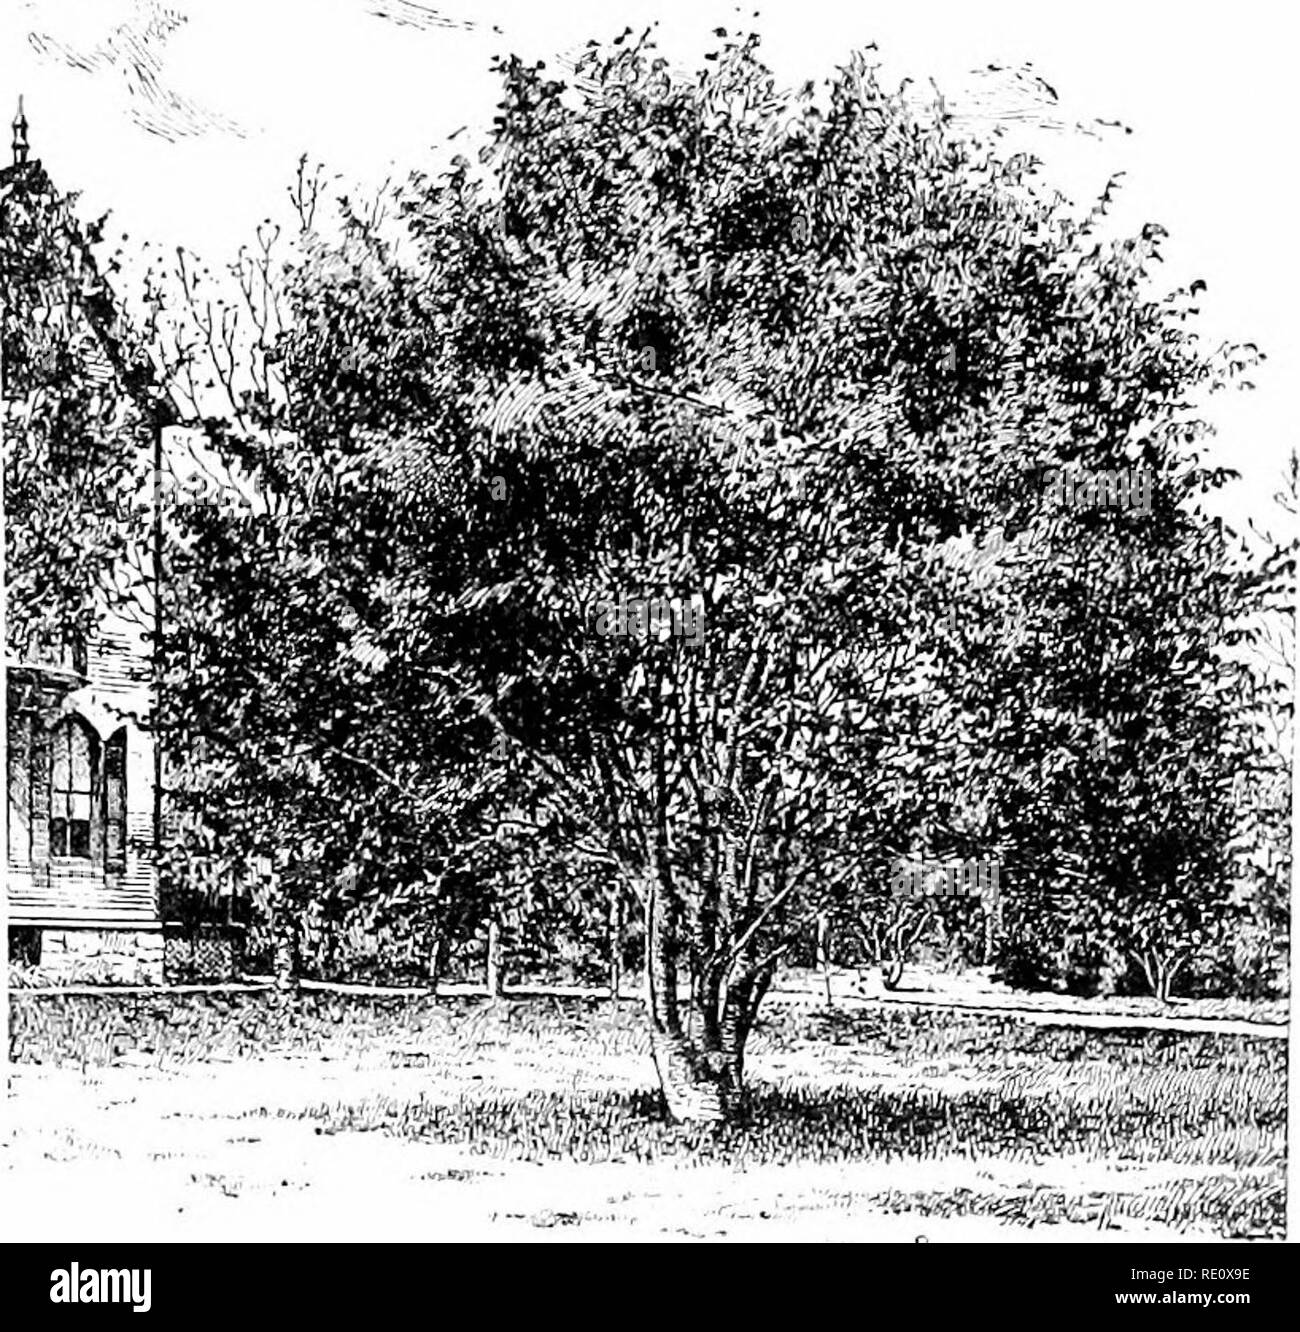 . Cyclopedia of American horticulture, comprising suggestions for cultivation of horticultural plants, descriptions of the species of fruits, vegetables, flowers, and ornamental plants sold in the United States and Canada, together with geographical and biographical sketches. Gardening. 804. Fagus ferrueinea (left), and F. sylvatica (X,'()- FAIK MAIDS OF FRANCE. nunc u 111s a con ififoIiu .s'. Double forms of Ba- FAIRT LILY. Cooperia â pedunculata. FANWORT. See Cahomba. FAEFUGIUM. See Seneeio Kconpferi. FATSIA (from a Japanese name). Araliclcew. This genus is doubly interesting as producing t Stock Photo